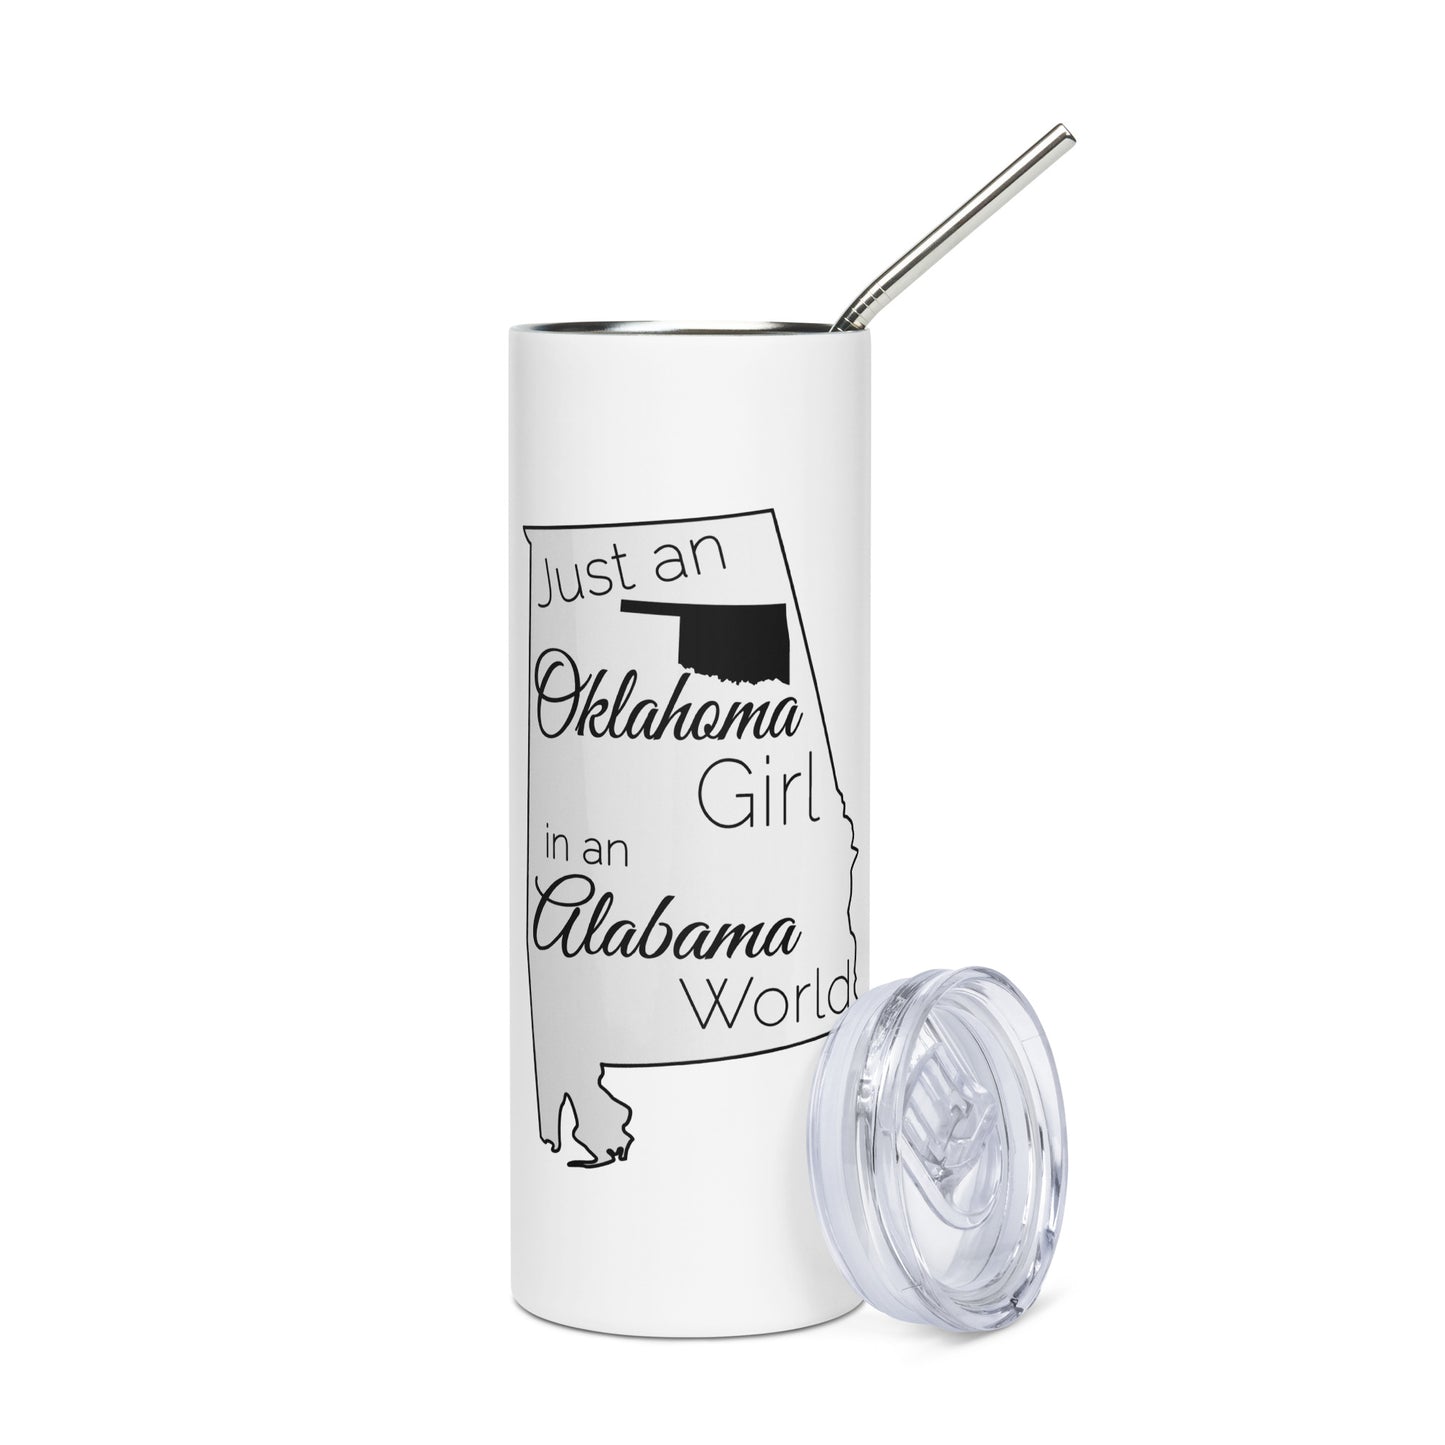 Just an Oklahoma Girl in an Alabama World Stainless steel tumbler